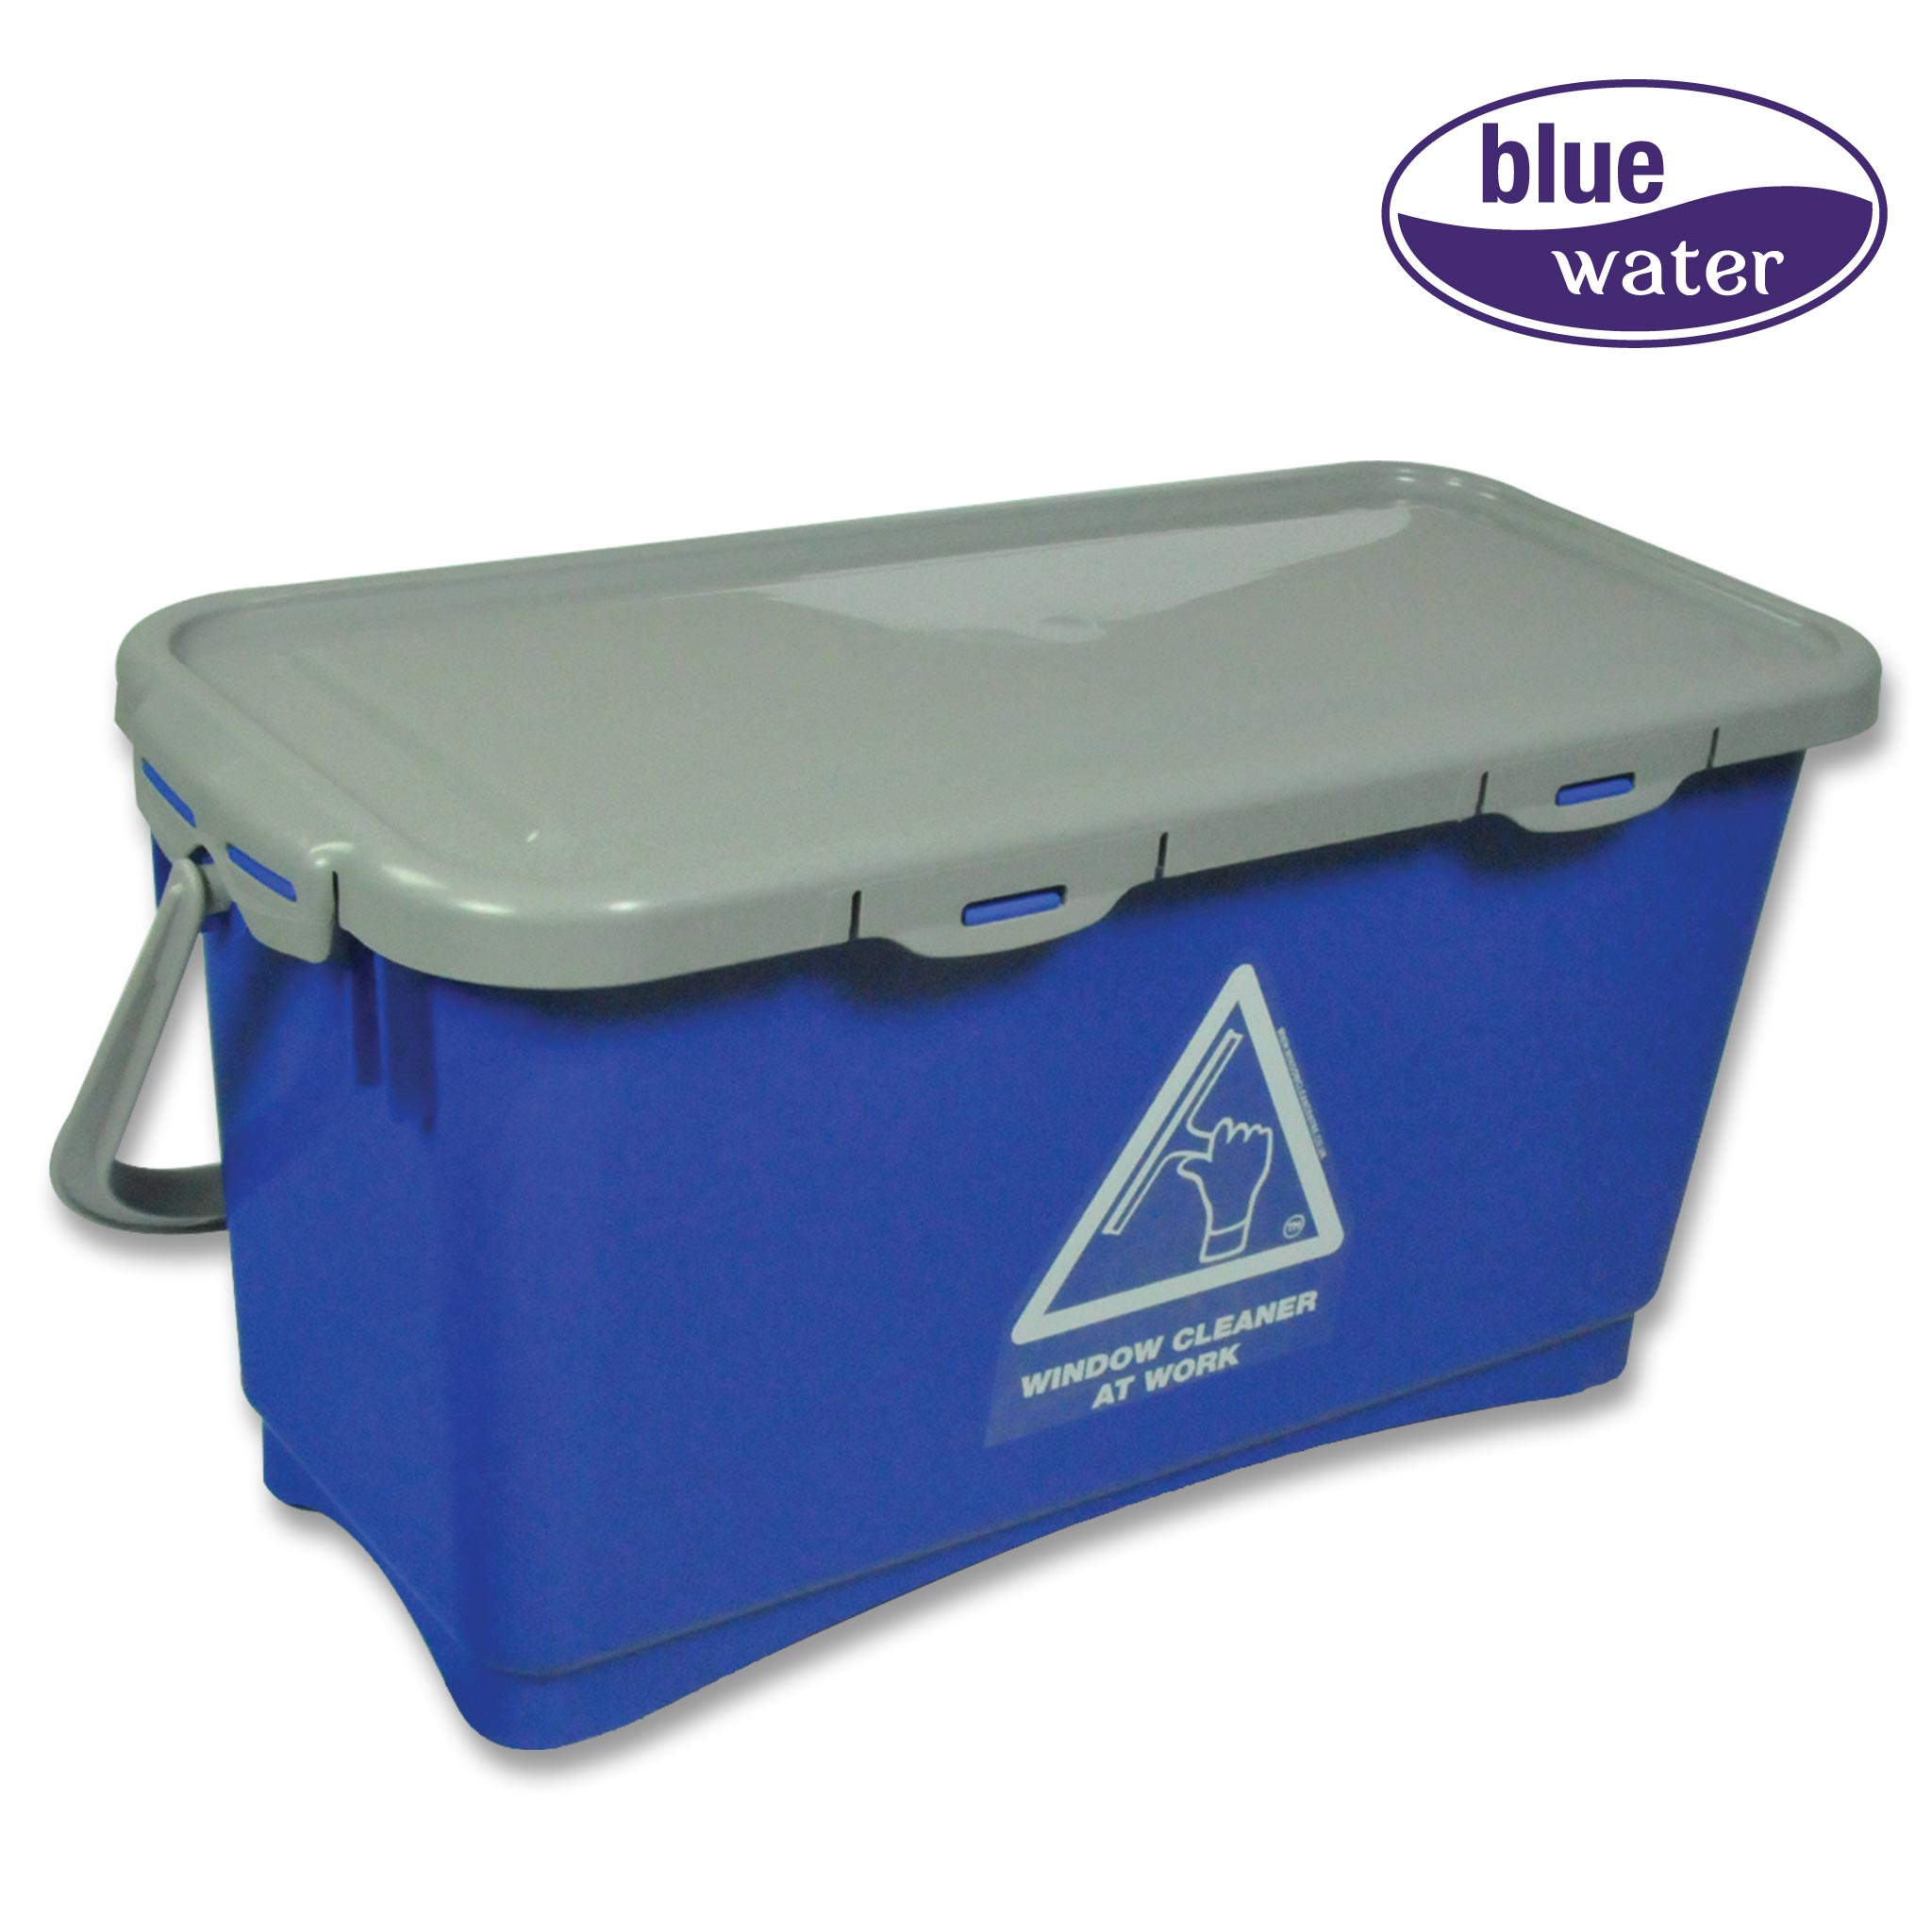 Bluewater Bucket and Lid - 20 Litre